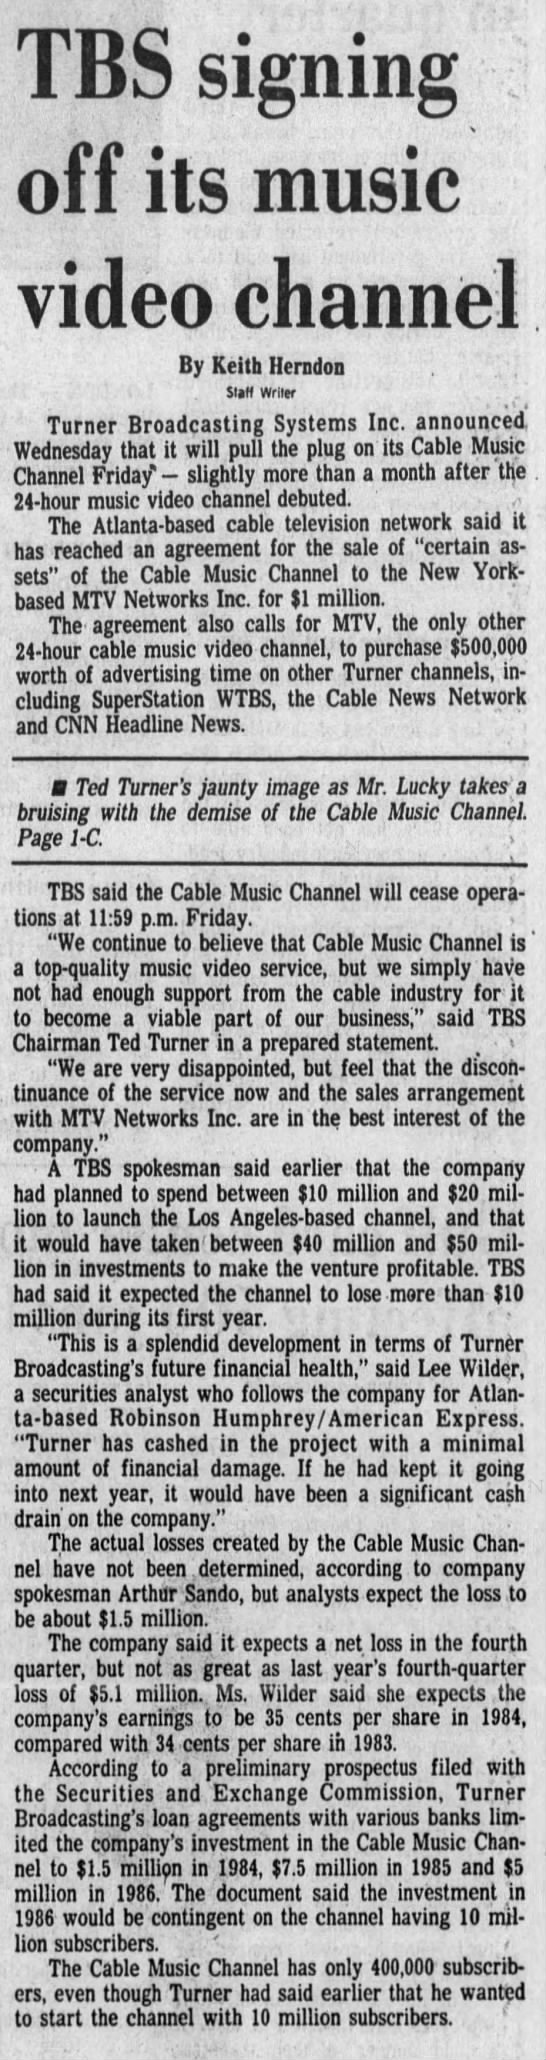 Turner sells Cable Music Channel, shuts down network - 